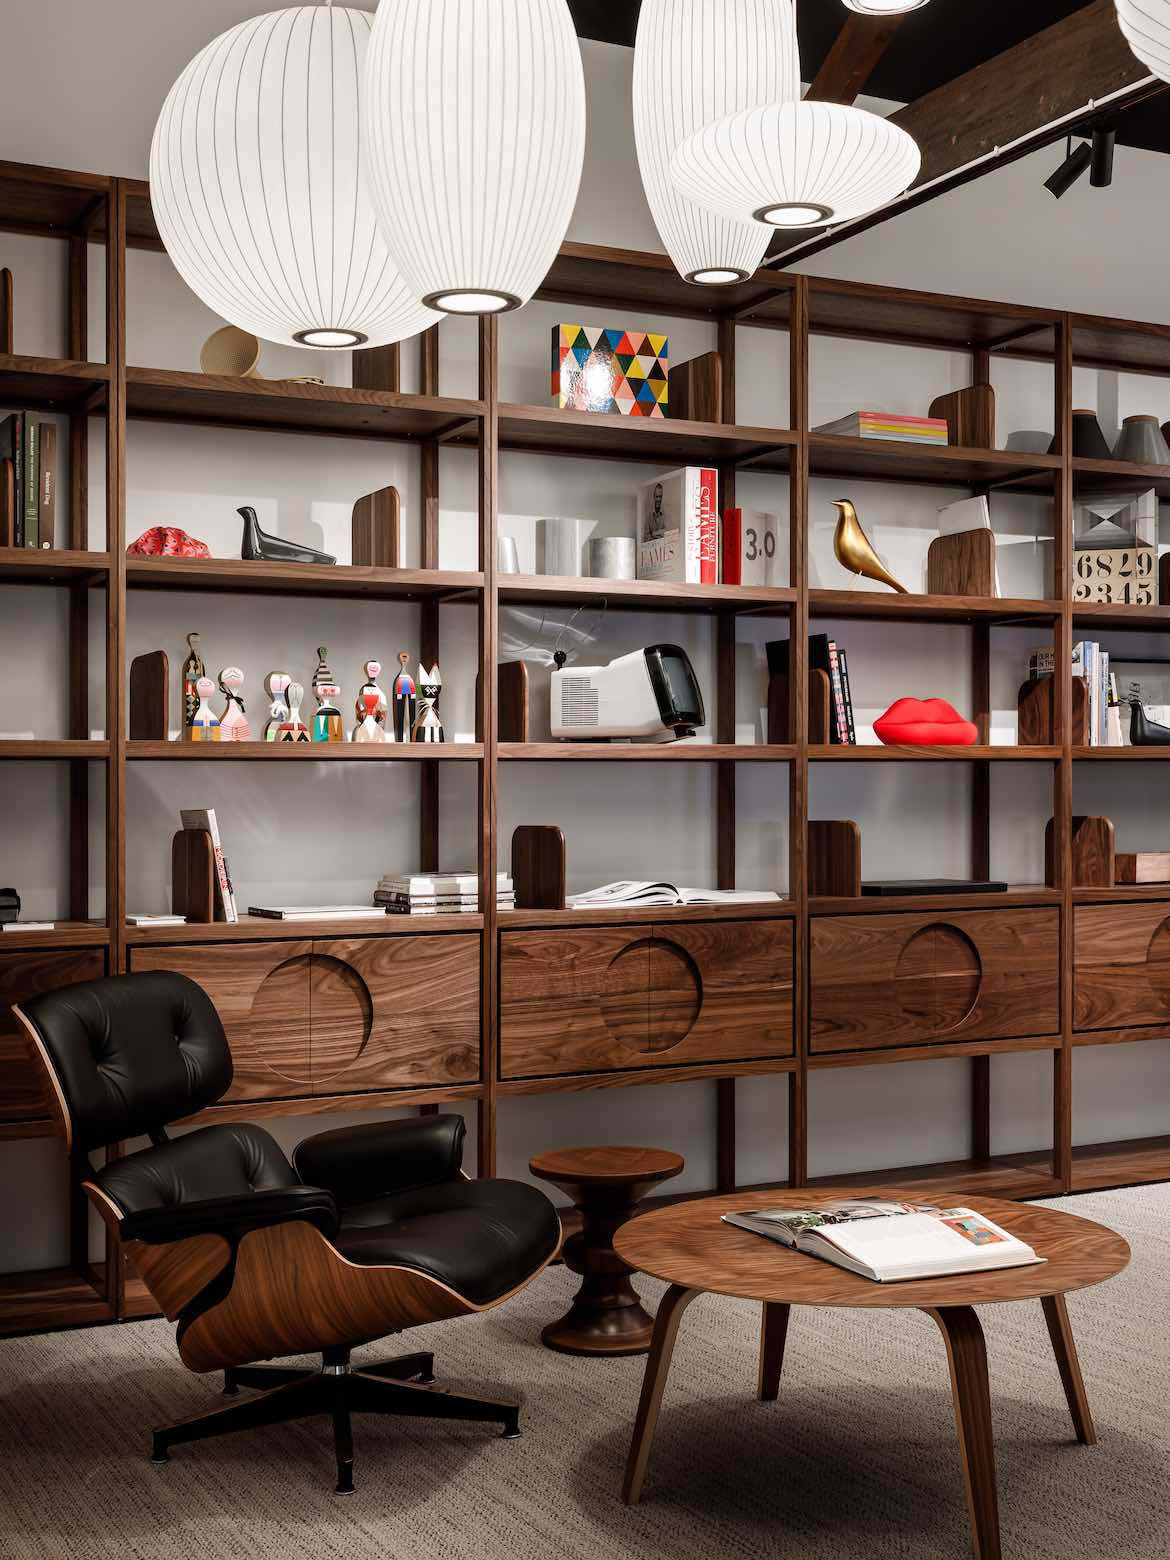 Brown Elan Plus modular Grid Shelving next to an Eames chair and other mid-century furniture.